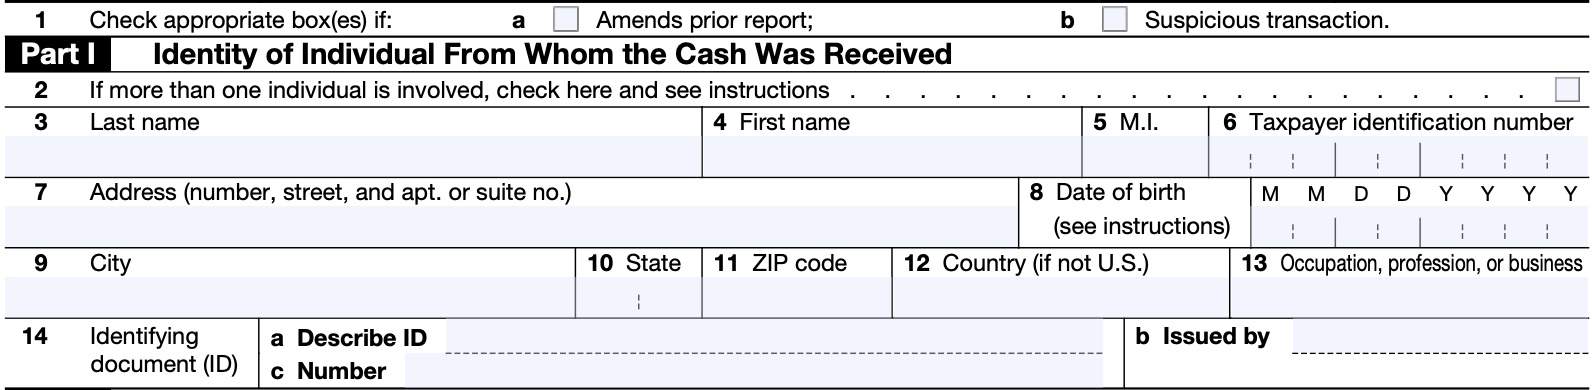 irs form 8300, part i: identity of individual from whom the cash was received